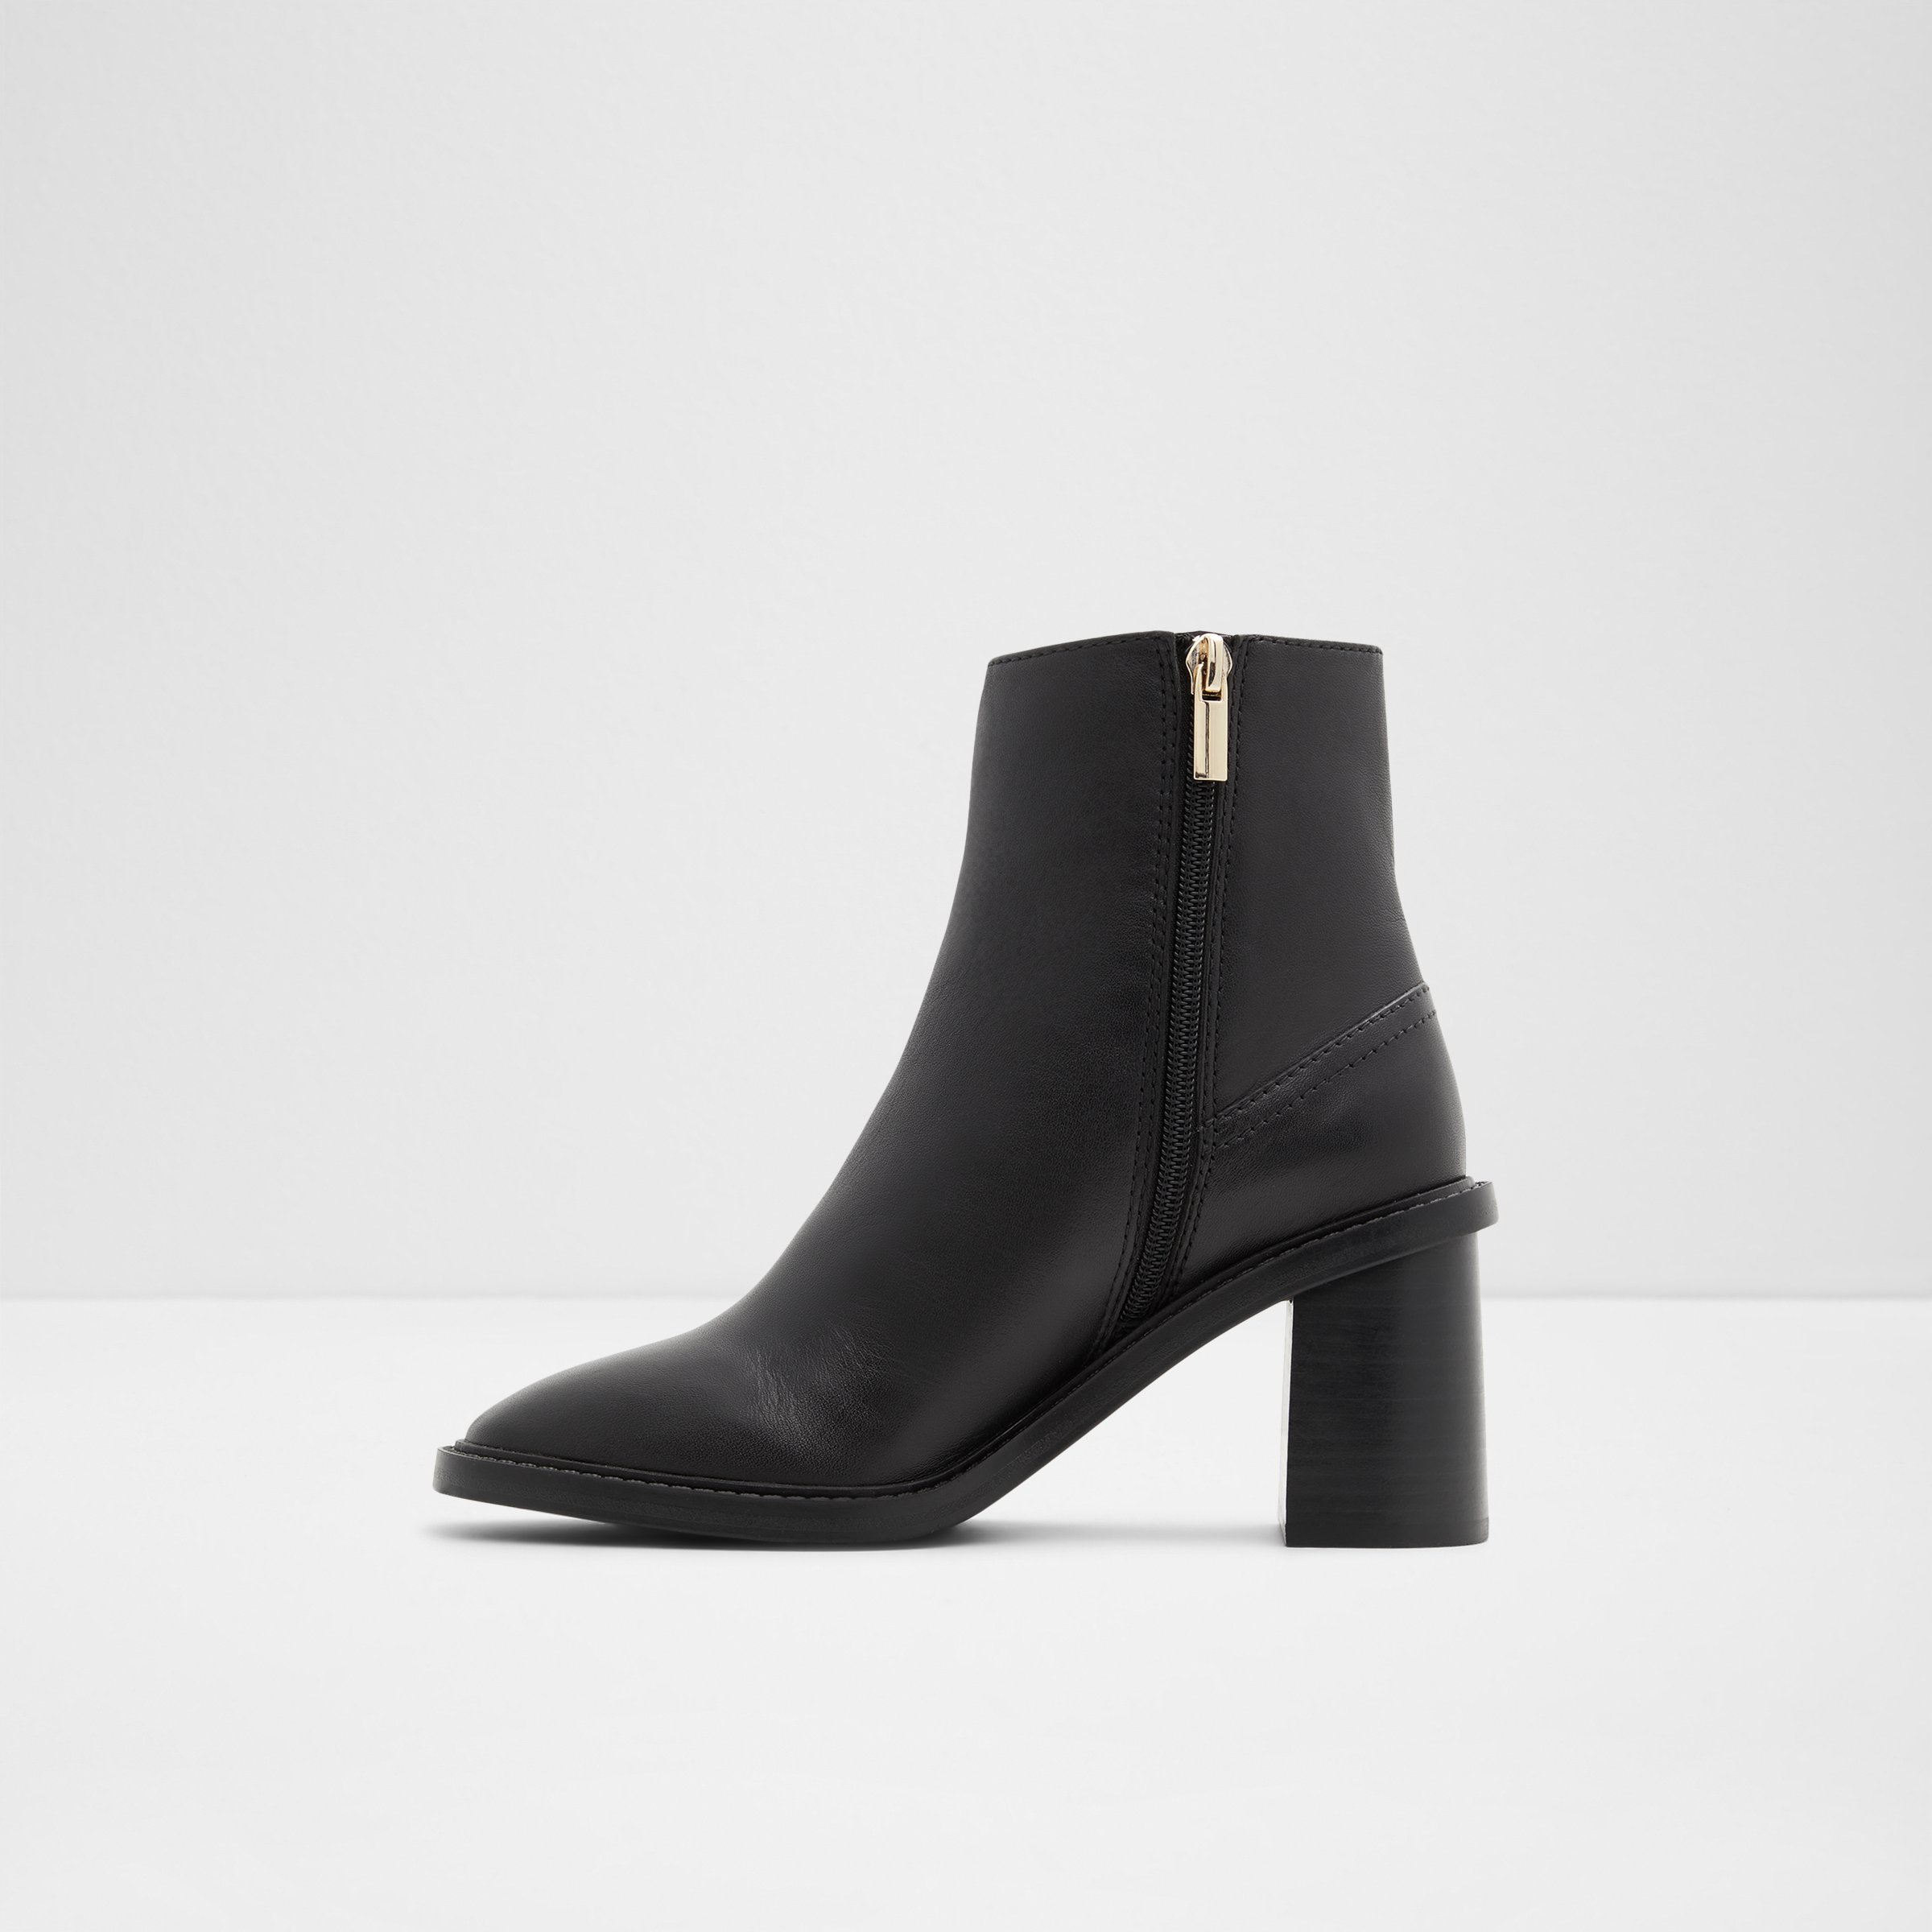 Filly Black Women's Ankle boots | ALDO Canada